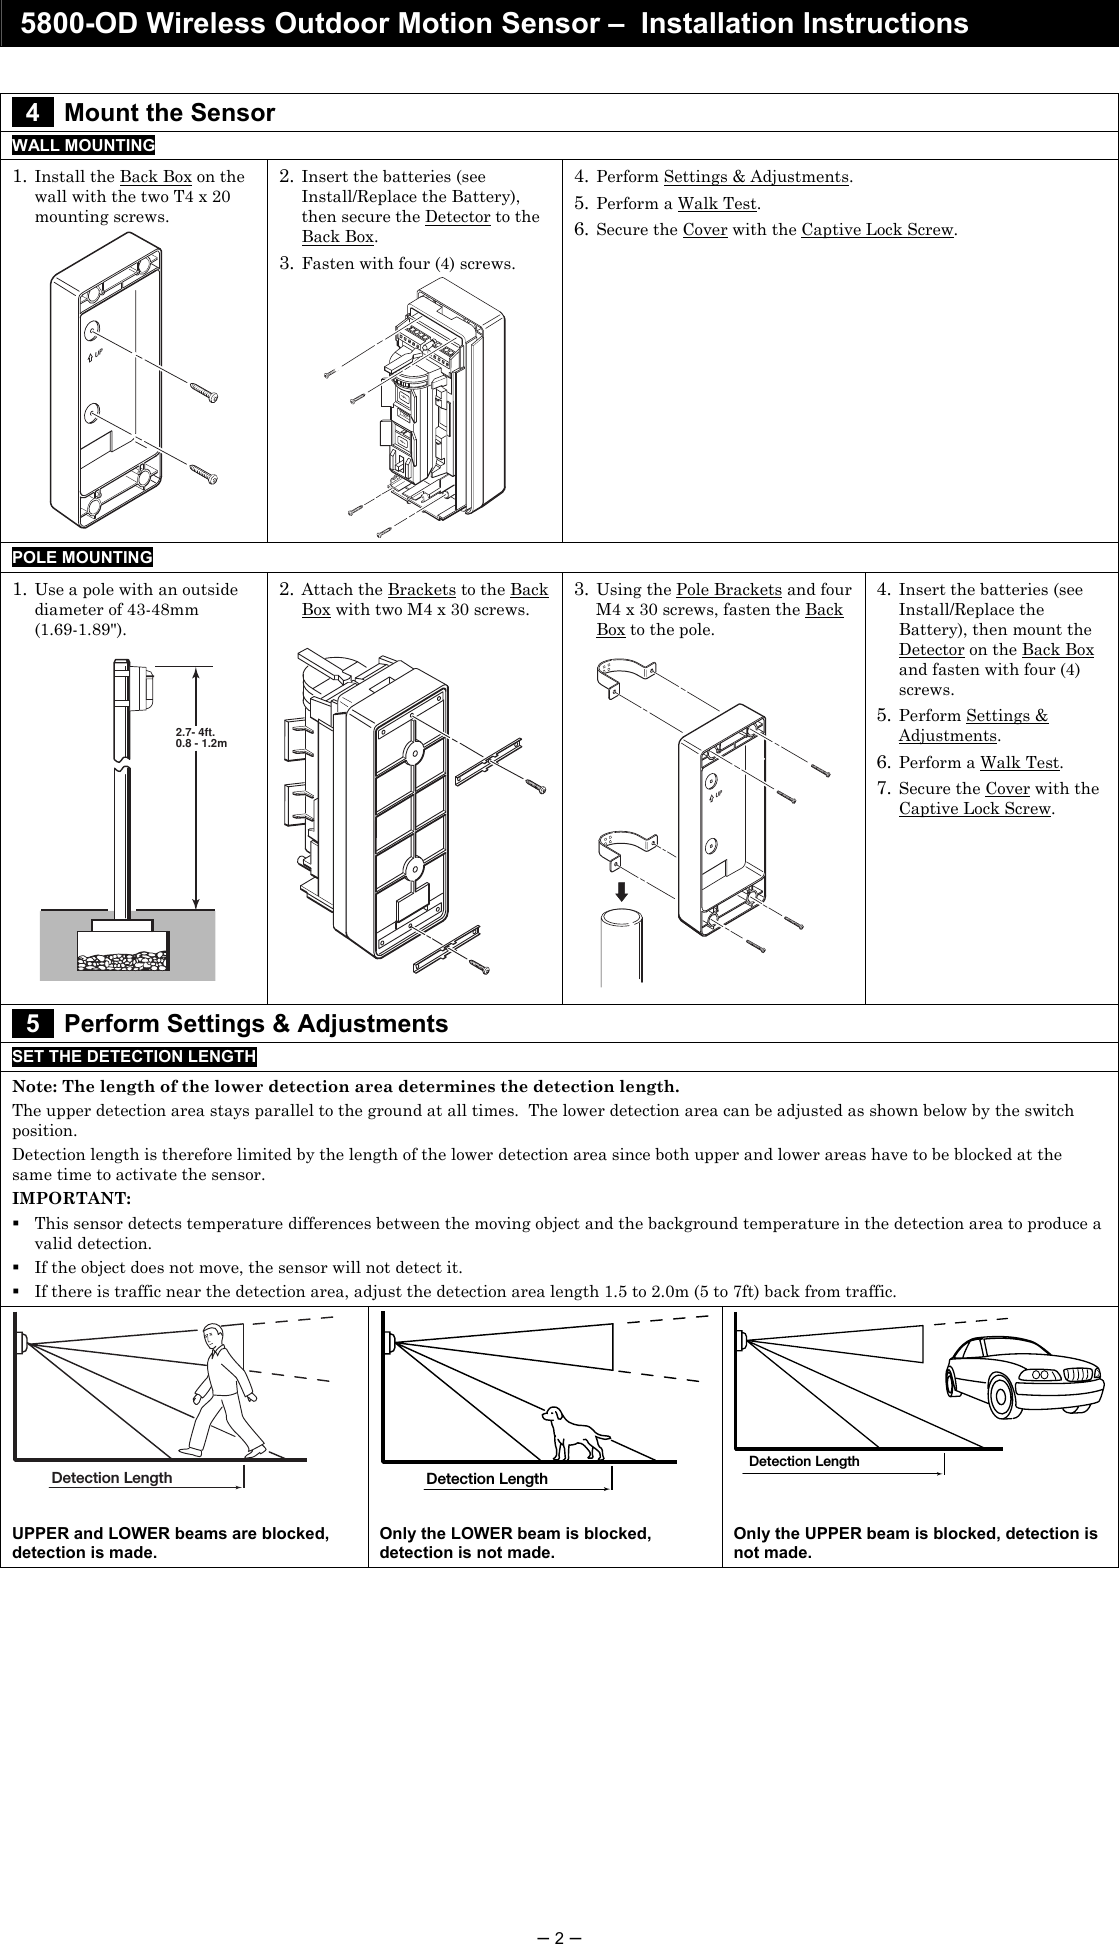  5800-OD Wireless Outdoor Motion Sensor –  Installation Instructions  – 2 –   4   Mount the Sensor WALL MOUNTING 1. Install the Back Box on the wall with the two T4 x 20 mounting screws. UP 2. Insert the batteries (see Install/Replace the Battery), then secure the Detector to the Back Box. 3. Fasten with four (4) screws.  4. Perform Settings &amp; Adjustments. 5. Perform a Walk Test. 6. Secure the Cover with the Captive Lock Screw. POLE MOUNTING   1. Use a pole with an outside diameter of 43-48mm  (1.69-1.89&quot;).  2.7- 4ft.0.8 - 1.2m 2. Attach the Brackets to the Back Box with two M4 x 30 screws.    3. Using the Pole Brackets and four M4 x 30 screws, fasten the Back Box to the pole.  UP 4. Insert the batteries (see Install/Replace the Battery), then mount the Detector on the Back Box and fasten with four (4) screws. 5. Perform Settings &amp; Adjustments. 6. Perform a Walk Test. 7. Secure the Cover with the Captive Lock Screw.  5   Perform Settings &amp; Adjustments SET THE DETECTION LENGTH Note: The length of the lower detection area determines the detection length. The upper detection area stays parallel to the ground at all times.  The lower detection area can be adjusted as shown below by the switch position. Detection length is therefore limited by the length of the lower detection area since both upper and lower areas have to be blocked at the same time to activate the sensor. IMPORTANT:   This sensor detects temperature differences between the moving object and the background temperature in the detection area to produce a valid detection.    If the object does not move, the sensor will not detect it.  If there is traffic near the detection area, adjust the detection area length 1.5 to 2.0m (5 to 7ft) back from traffic. Detection Length  Detection Length  Detection Length  UPPER and LOWER beams are blocked, detection is made. Only the LOWER beam is blocked, detection is not made. Only the UPPER beam is blocked, detection is not made.               